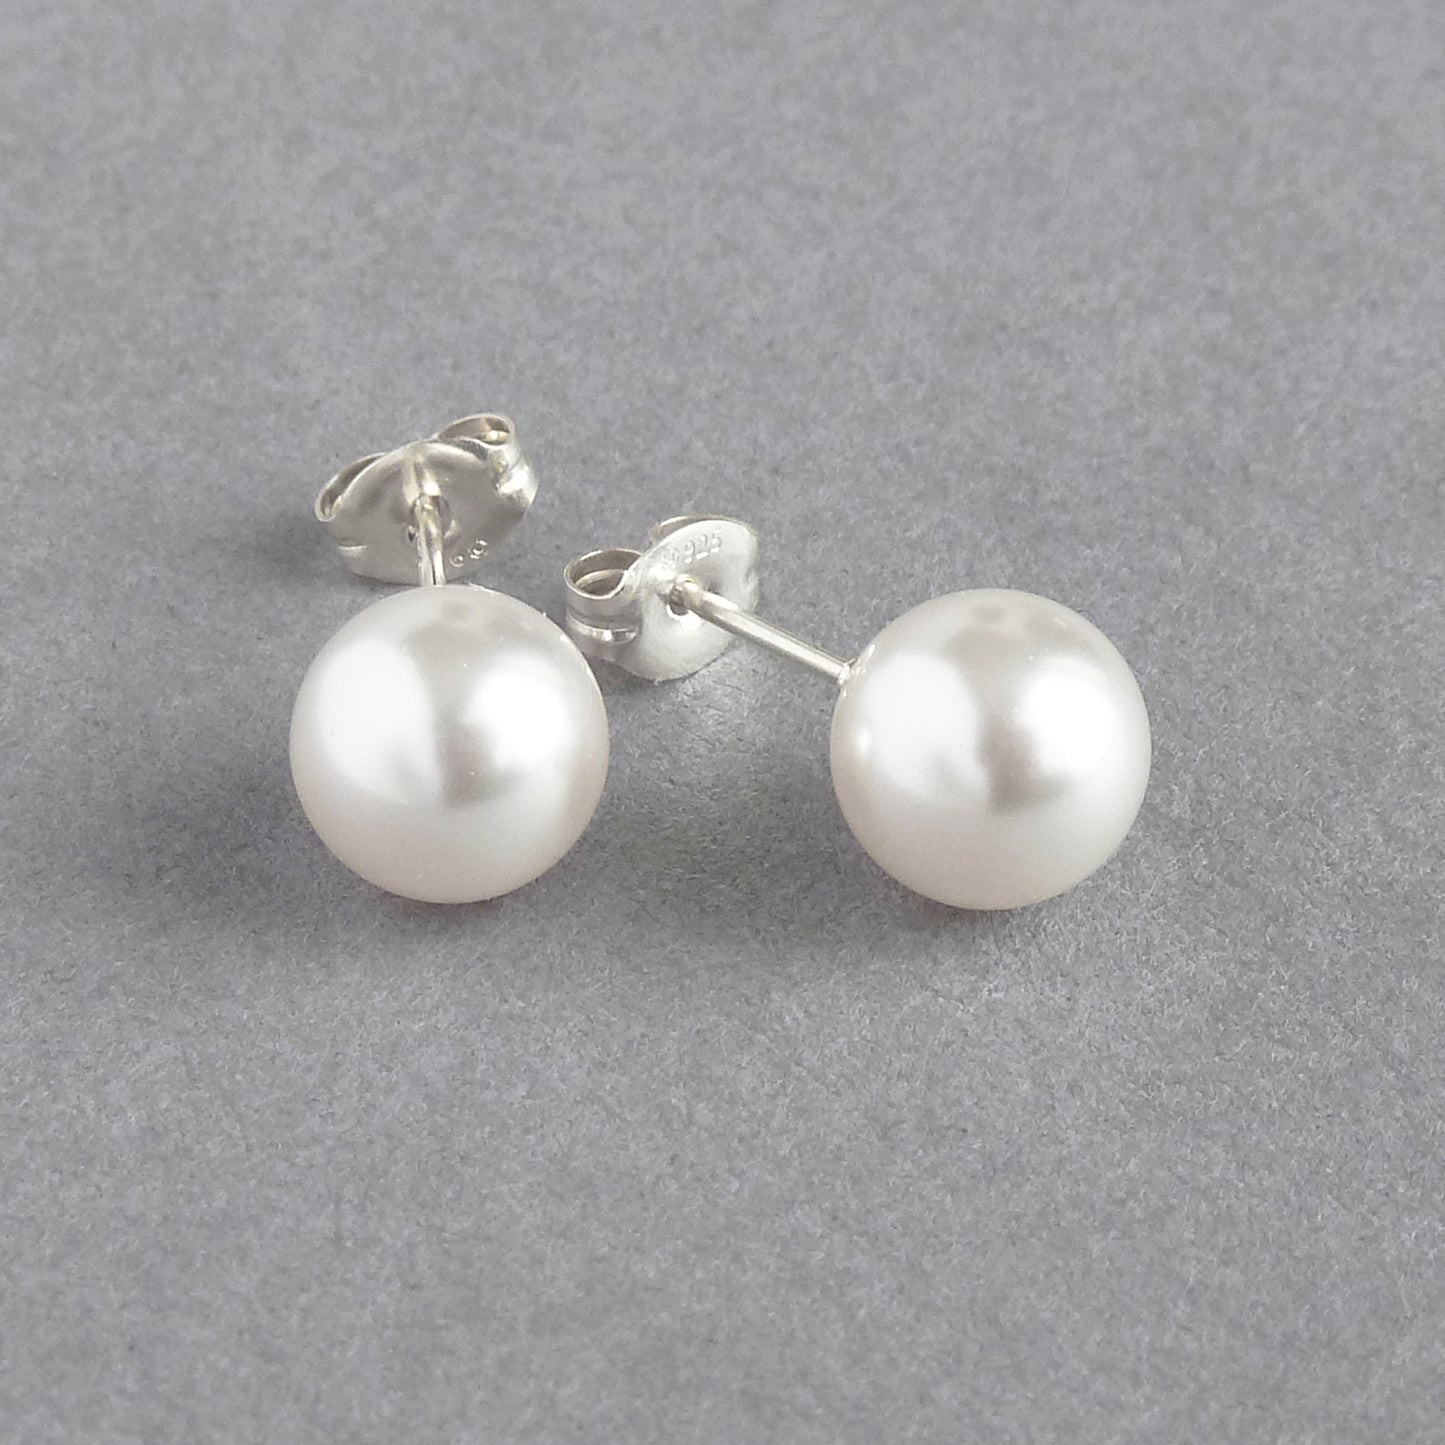 8mm round pearl stud earrings with Sterling silver posts